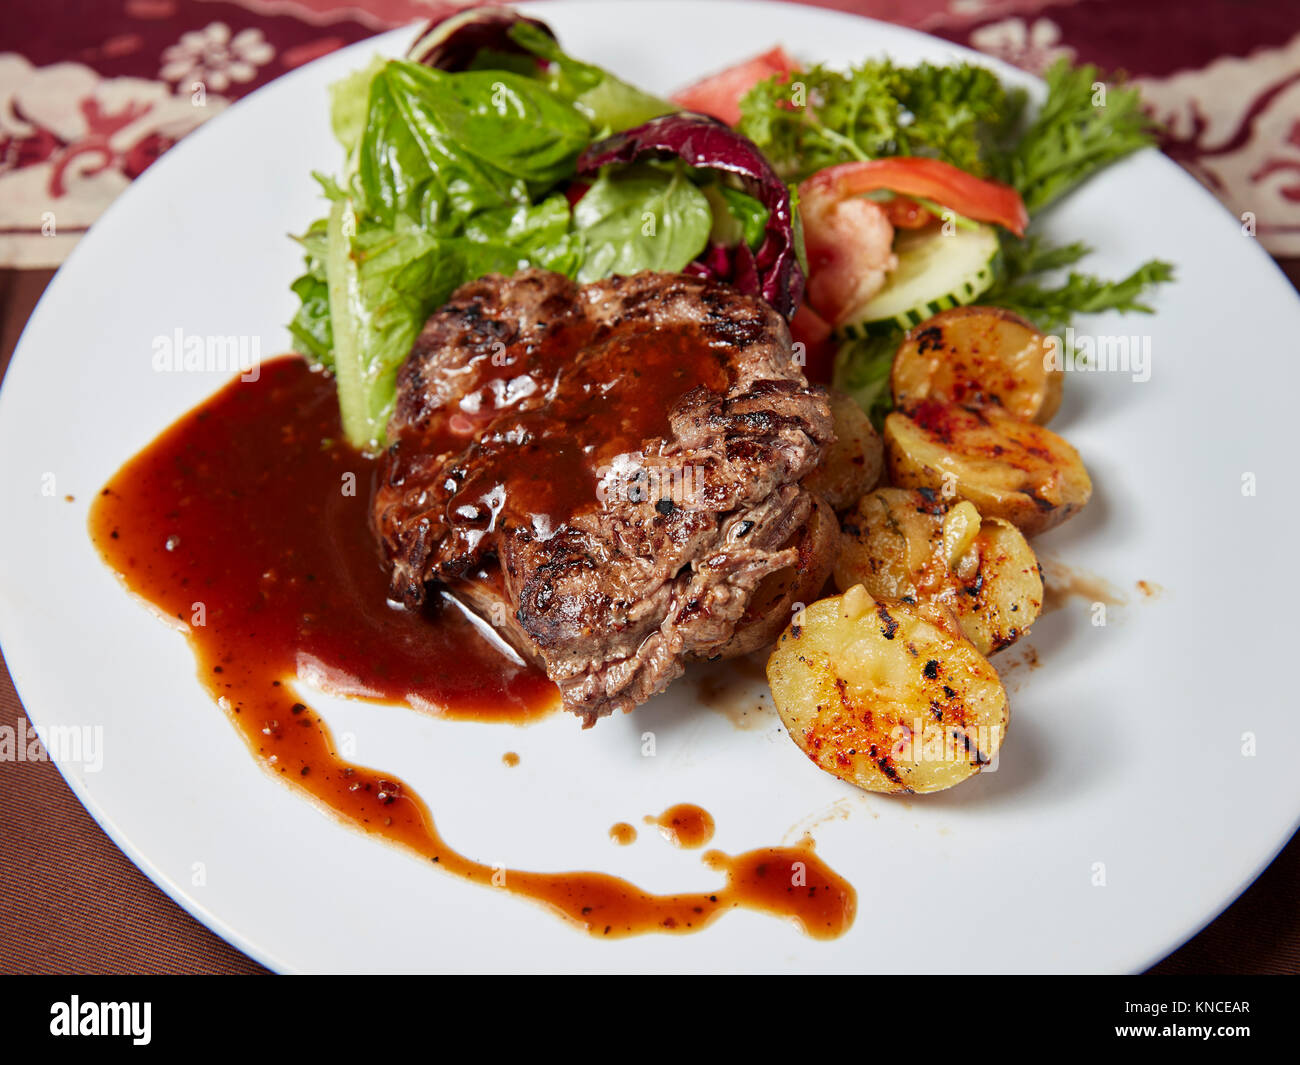 Grilled sirloin beef steak with potato wedges and green salad served in a local warung (small  restaurant). Bali, Indonesia. Stock Photo